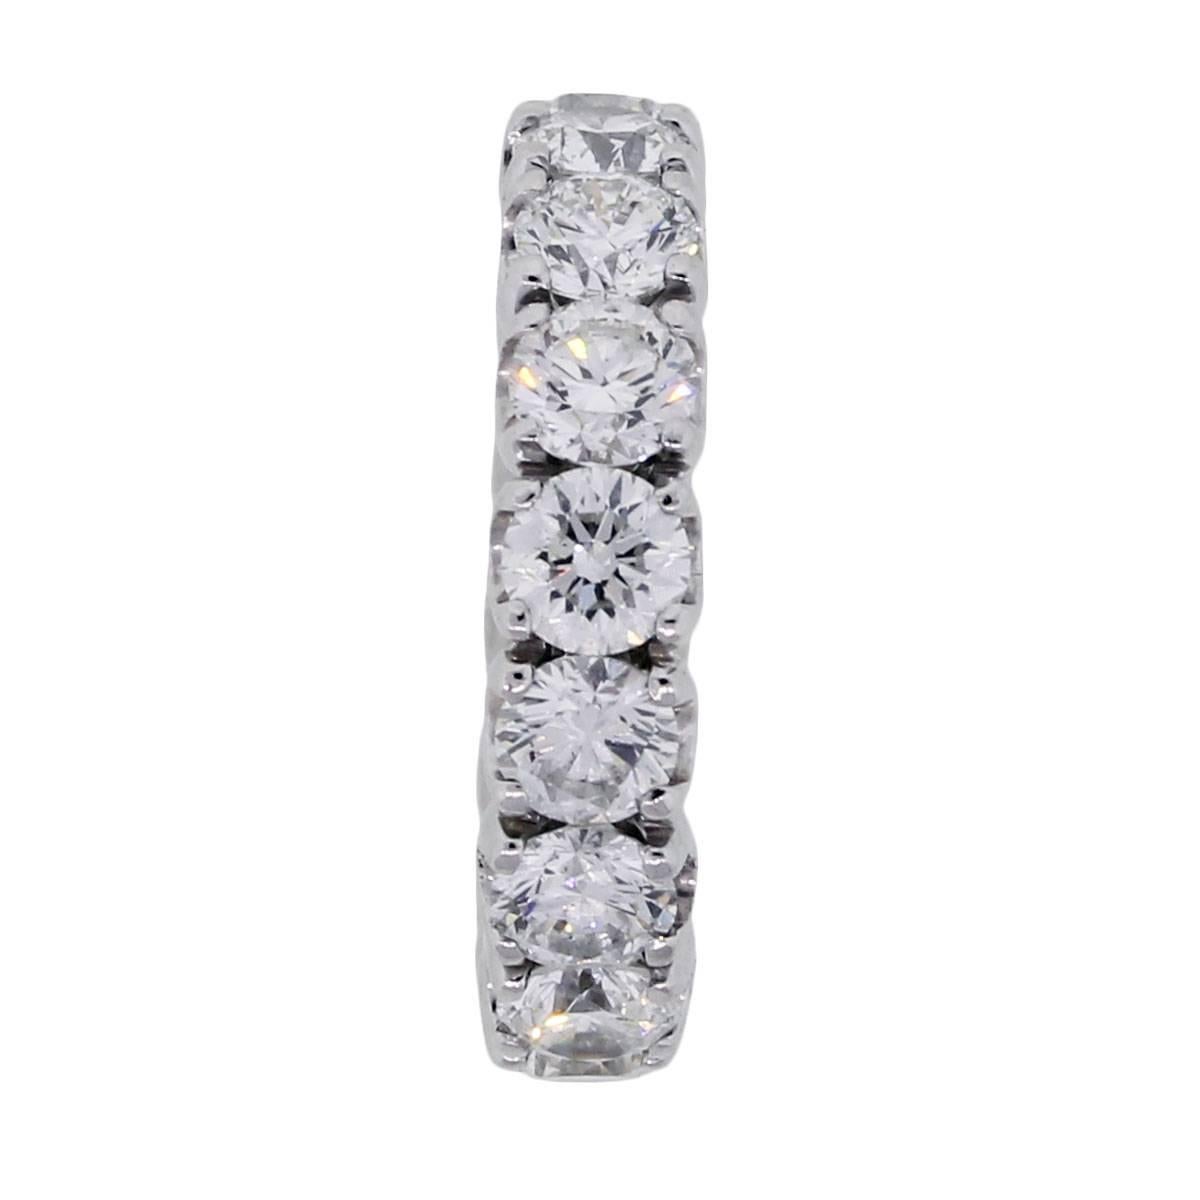 Material: 14k white gold
Diamond Details: Approximately 6ctw of round brilliant diamonds. Diamonds are G/H in color and SI in clarity
Ring Size: 6 (cannot be sized)
Ring Measurements: 0.89″ x 0.19″ x 0.89″
Total Weight: 5.5g (3.5dwt)
Additional